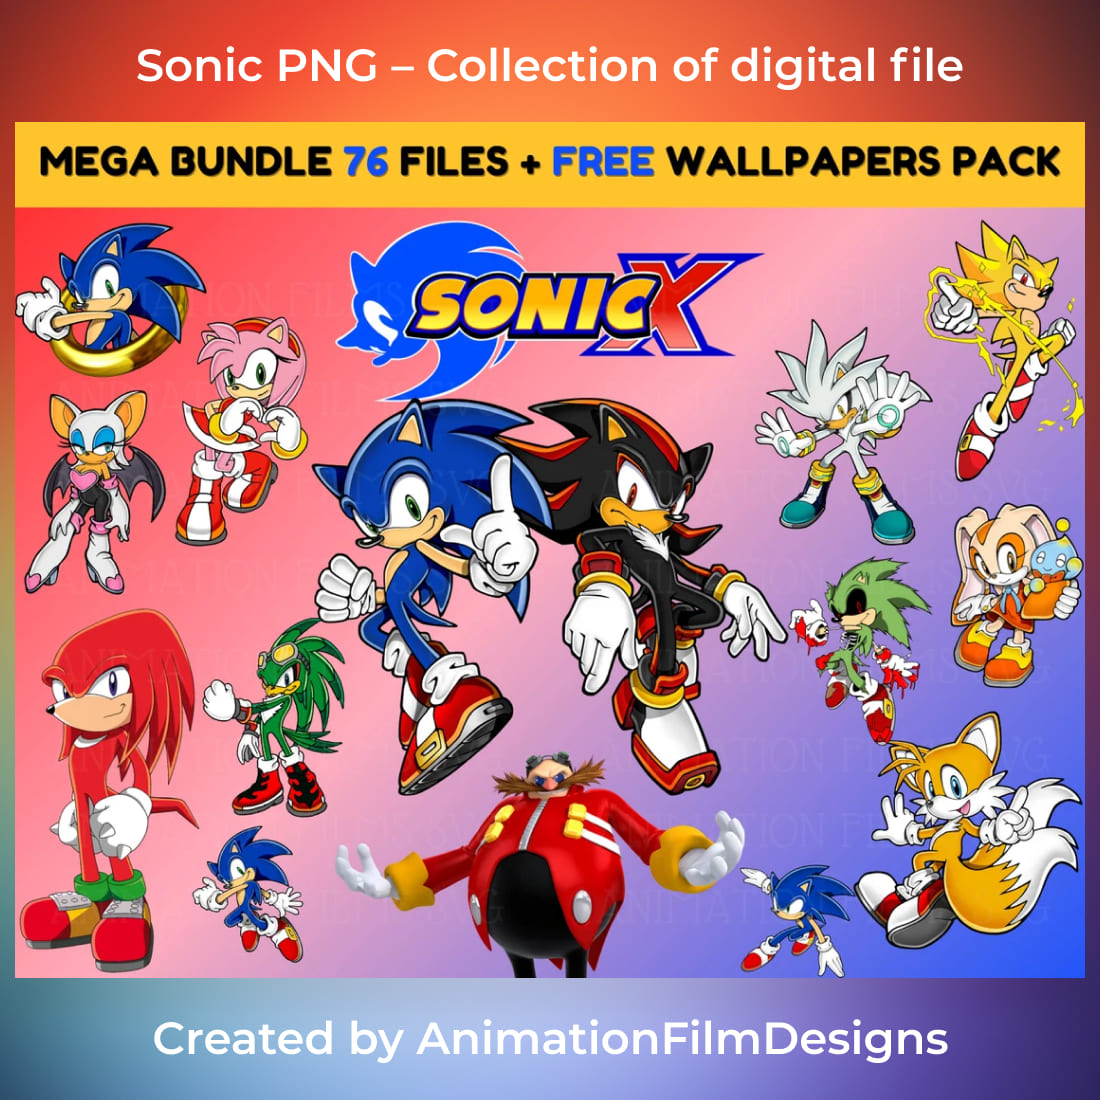 Sonic PNG – Collection of digital file.